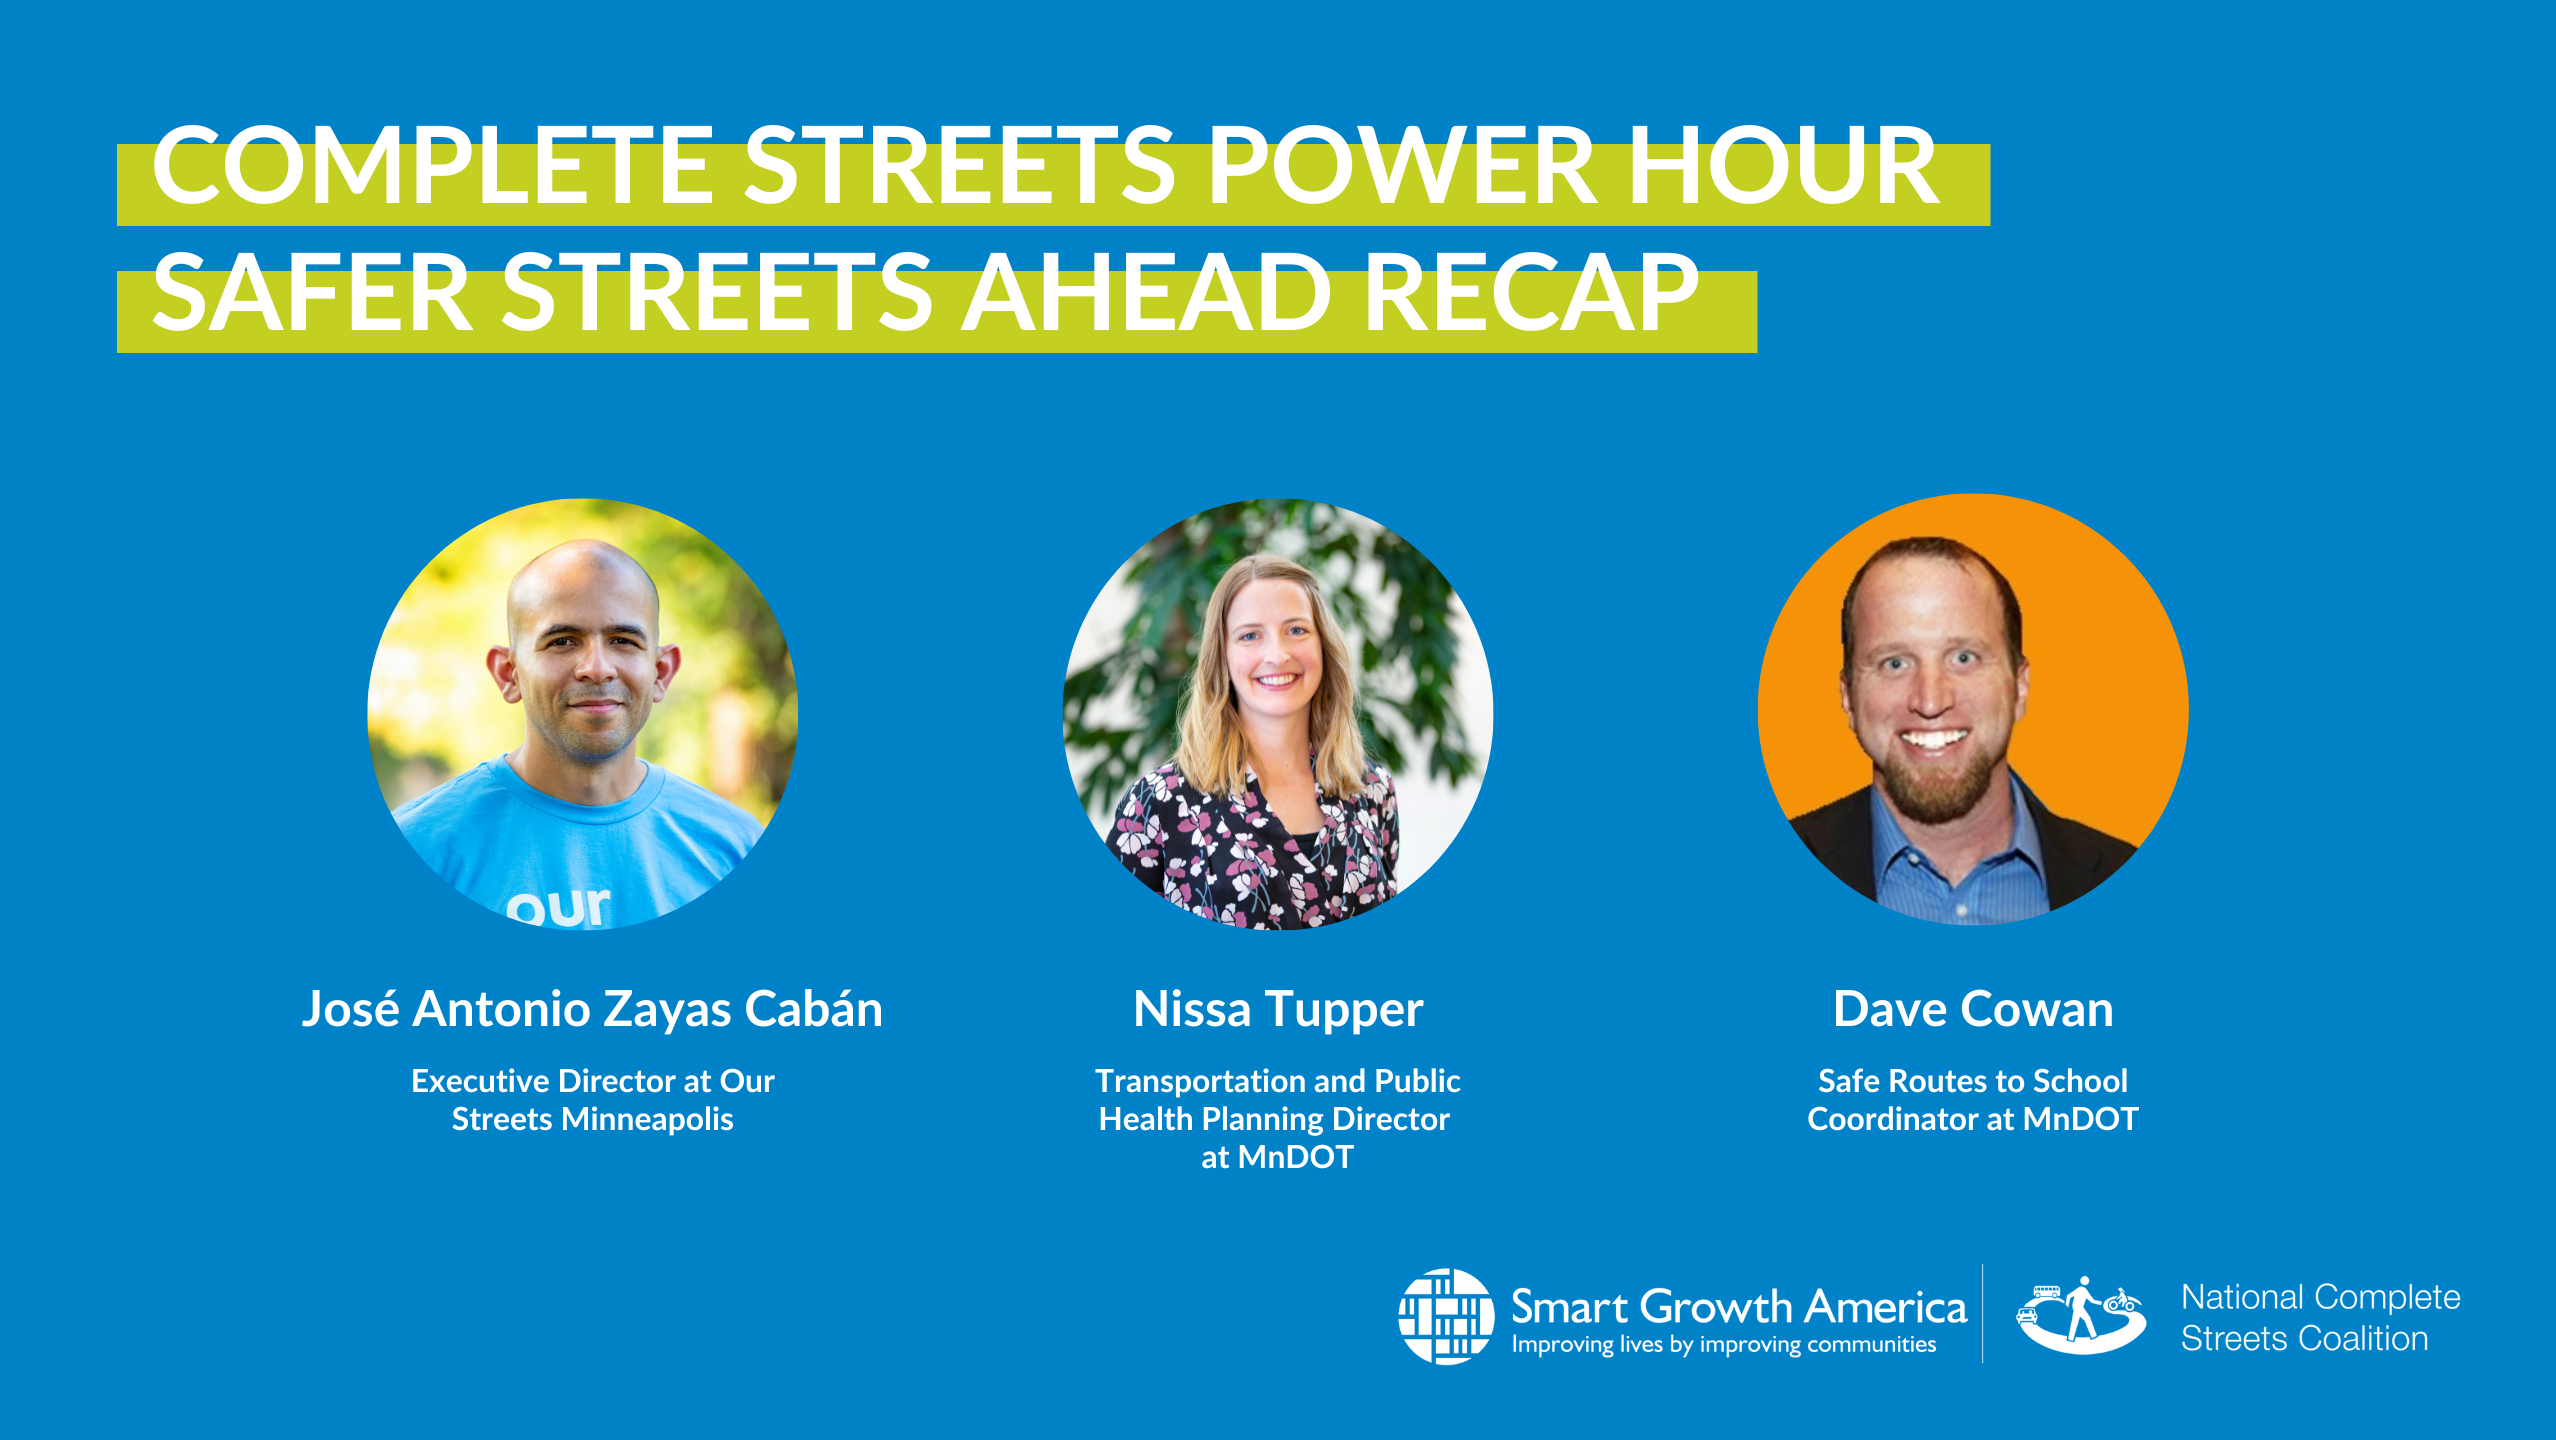 Complete Streets Power Hour Safe Streets Ahead Recap with headshots of the three speakers: José Antonio Zayas Cabán, Nissa Tupper, and Dave Cowan.